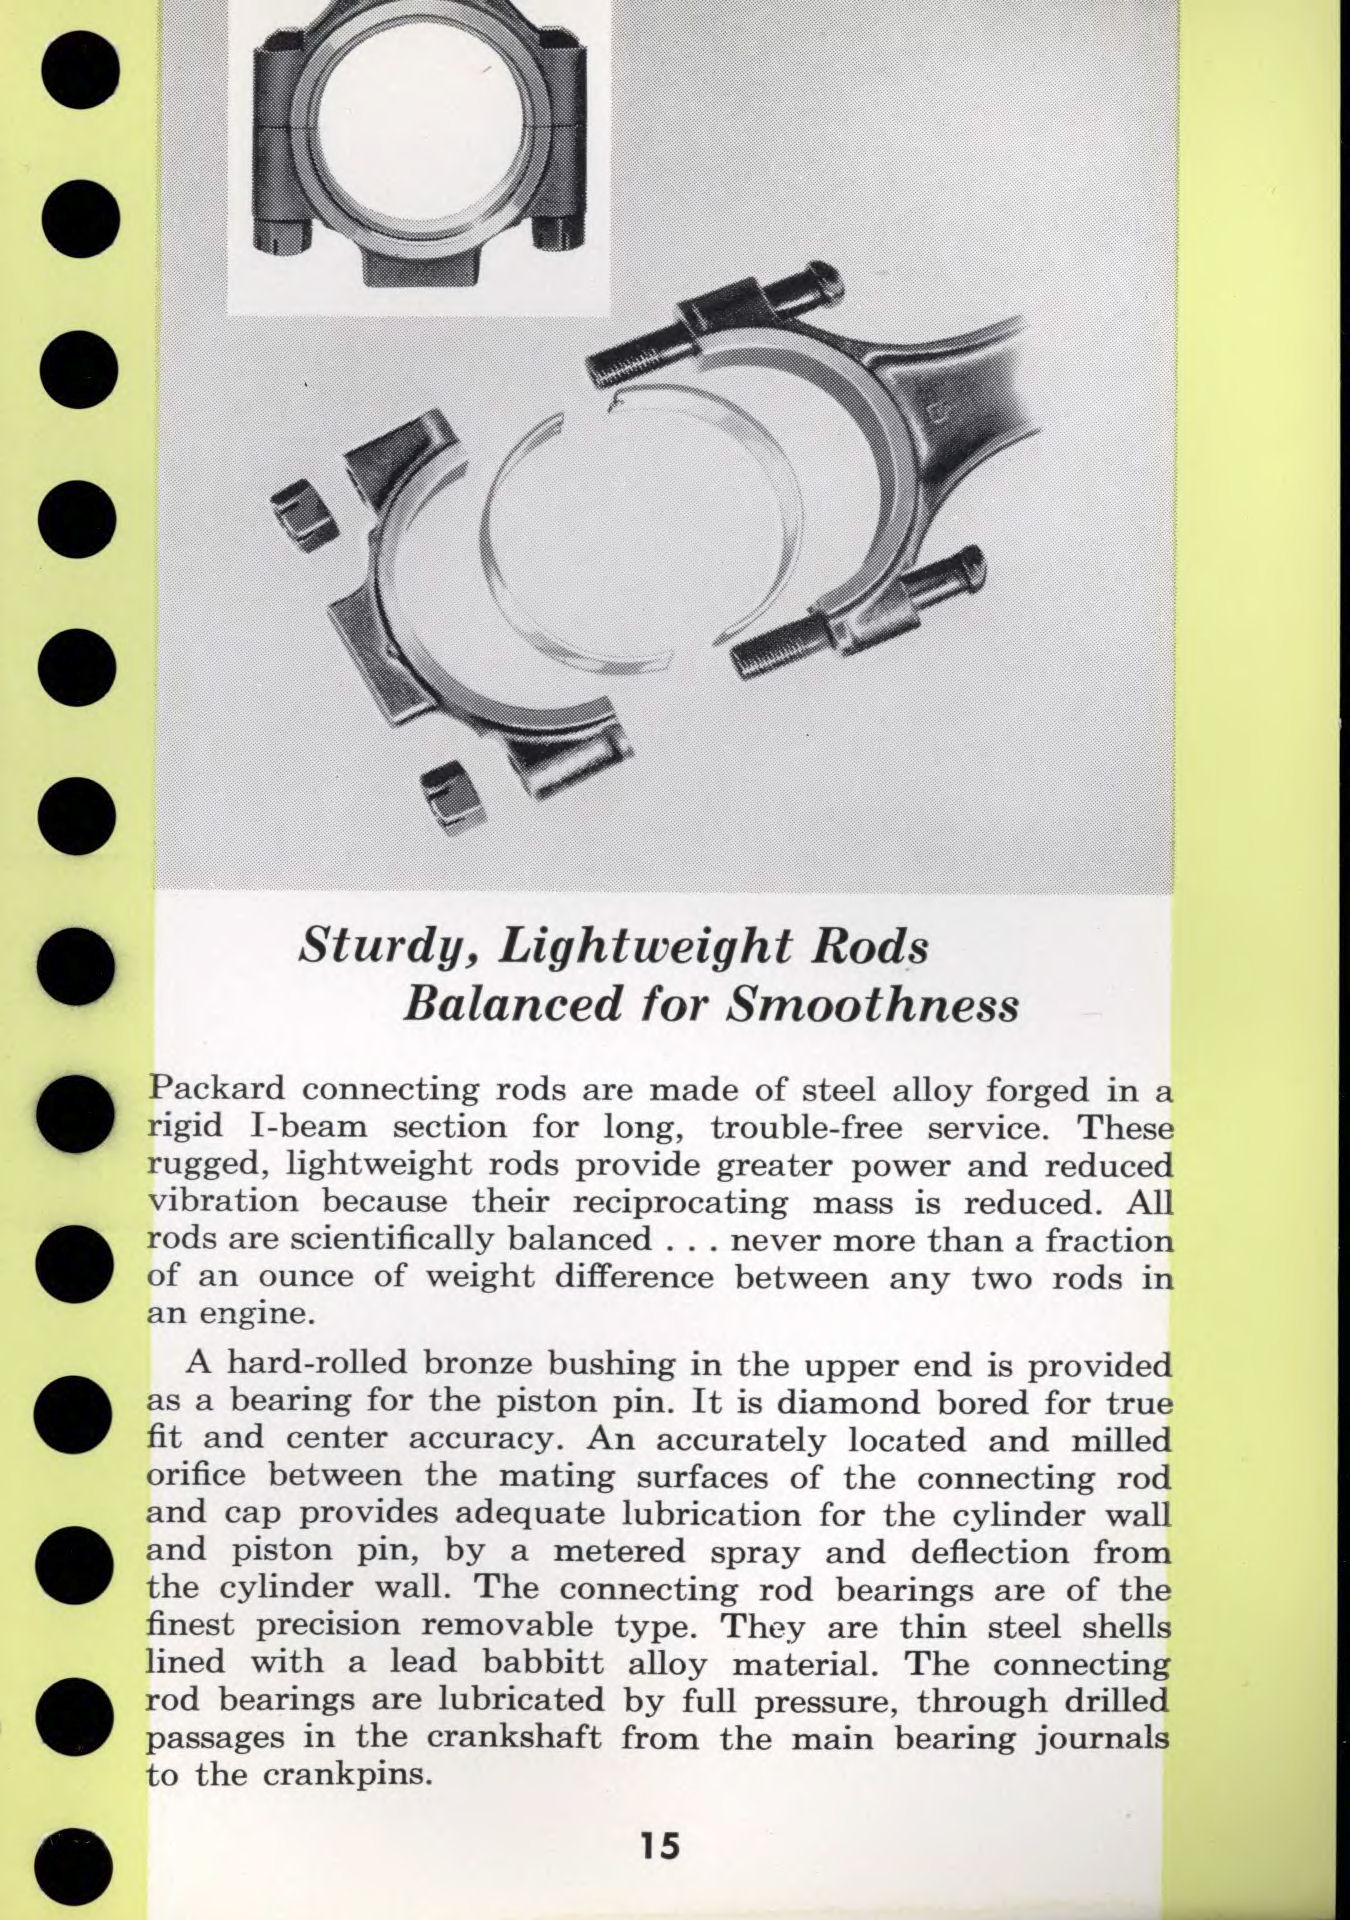 1956 Packard Data Book Page 23